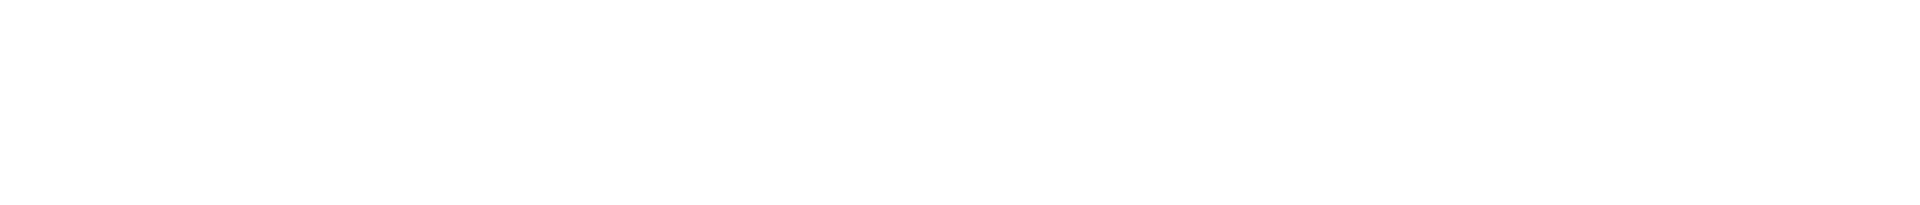 A green and white background with a large number of lines.